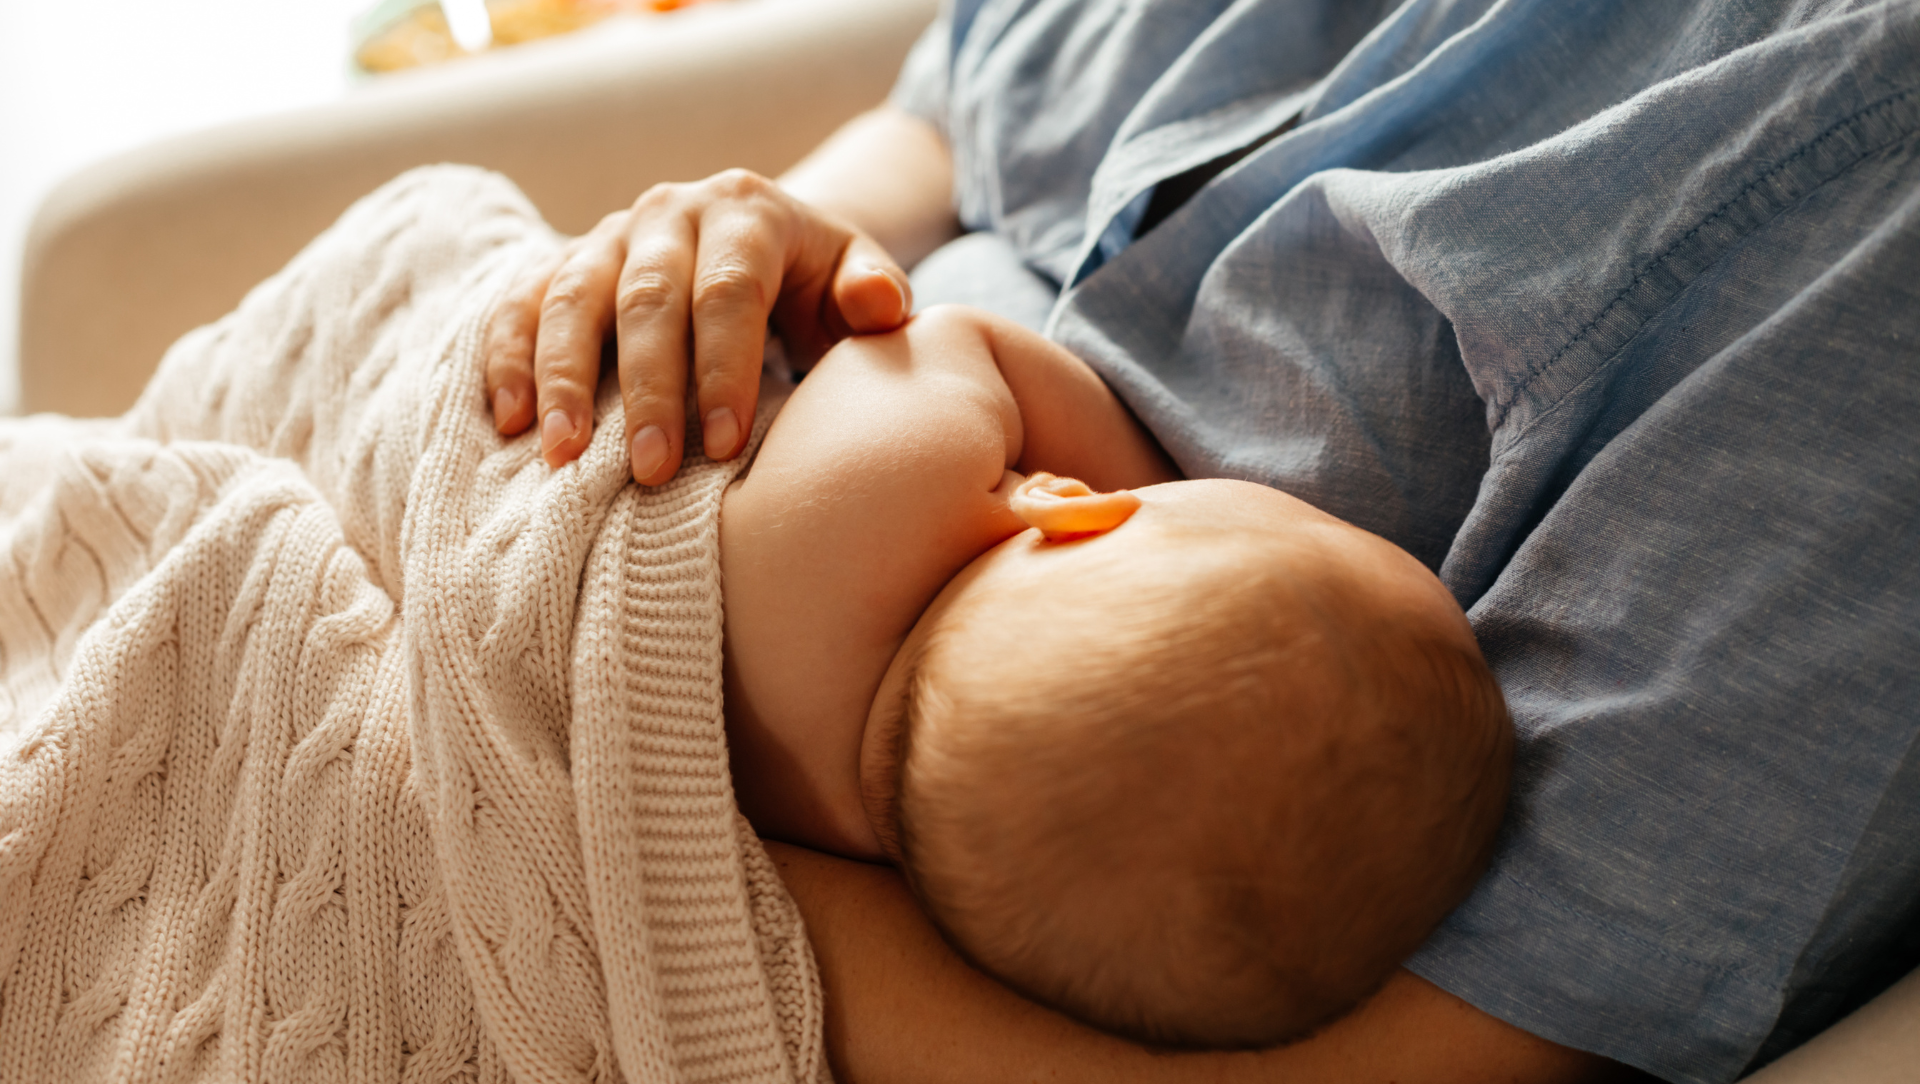 5 Common Breastfeeding Challenges and How to Overcome Them: Expert Tips for New Moms